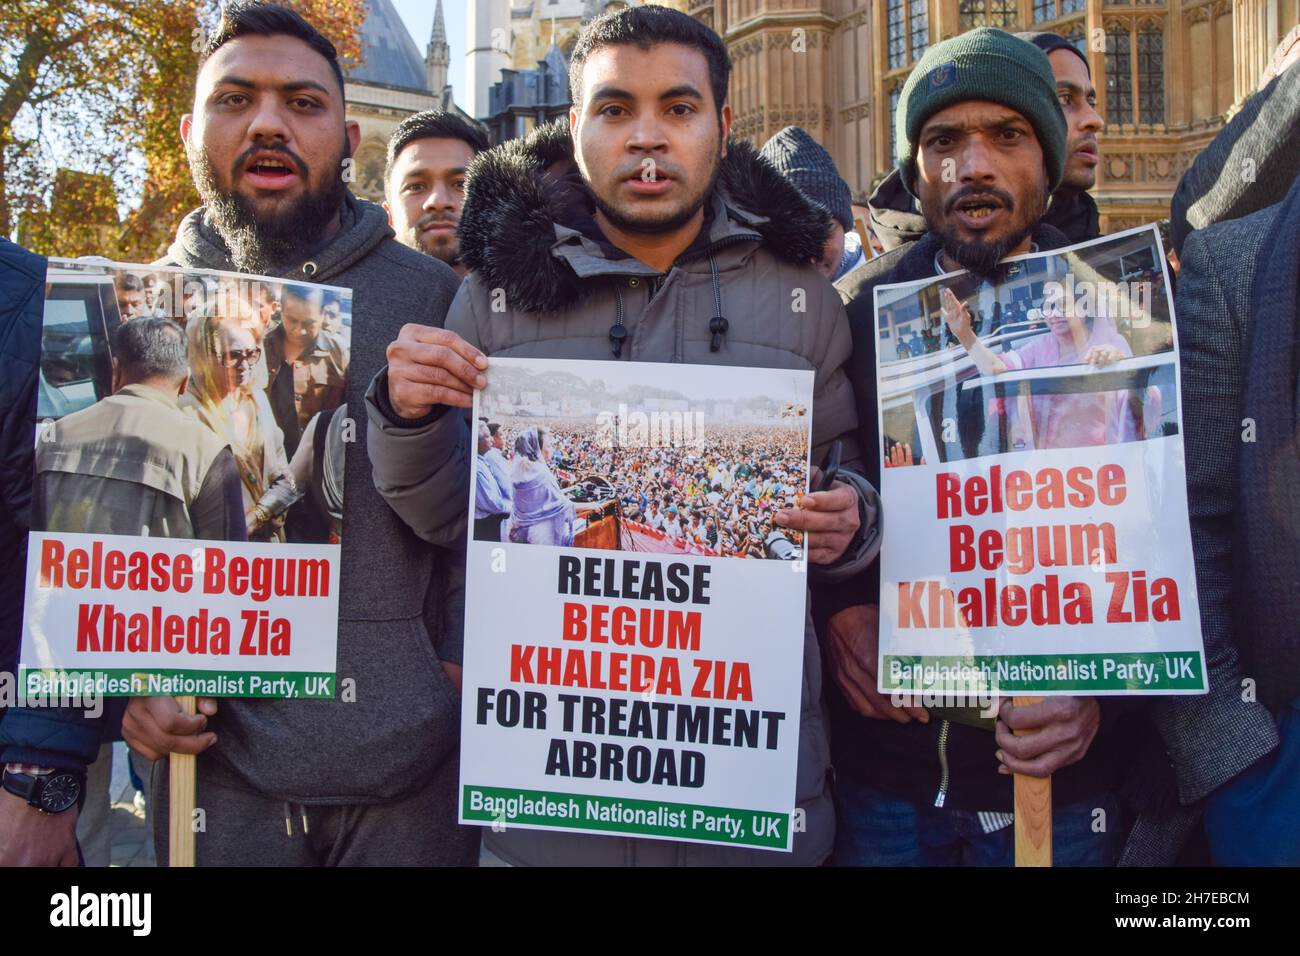 London, UK. 22nd Nov, 2021. Demonstrators hold placards in support of Khaleda Zia during the demonstration outside the UK parliament.Demonstrators gathered outside the parliament in support of former Bangladesh Prime Minister and Bangladesh Nationalist Party leader Khaleda Zia, who has been suffering health problems, demanding that she be released for treatment abroad. (Photo by Vuk Valcic/SOPA Images/Sipa USA) Credit: Sipa USA/Alamy Live News Stock Photo